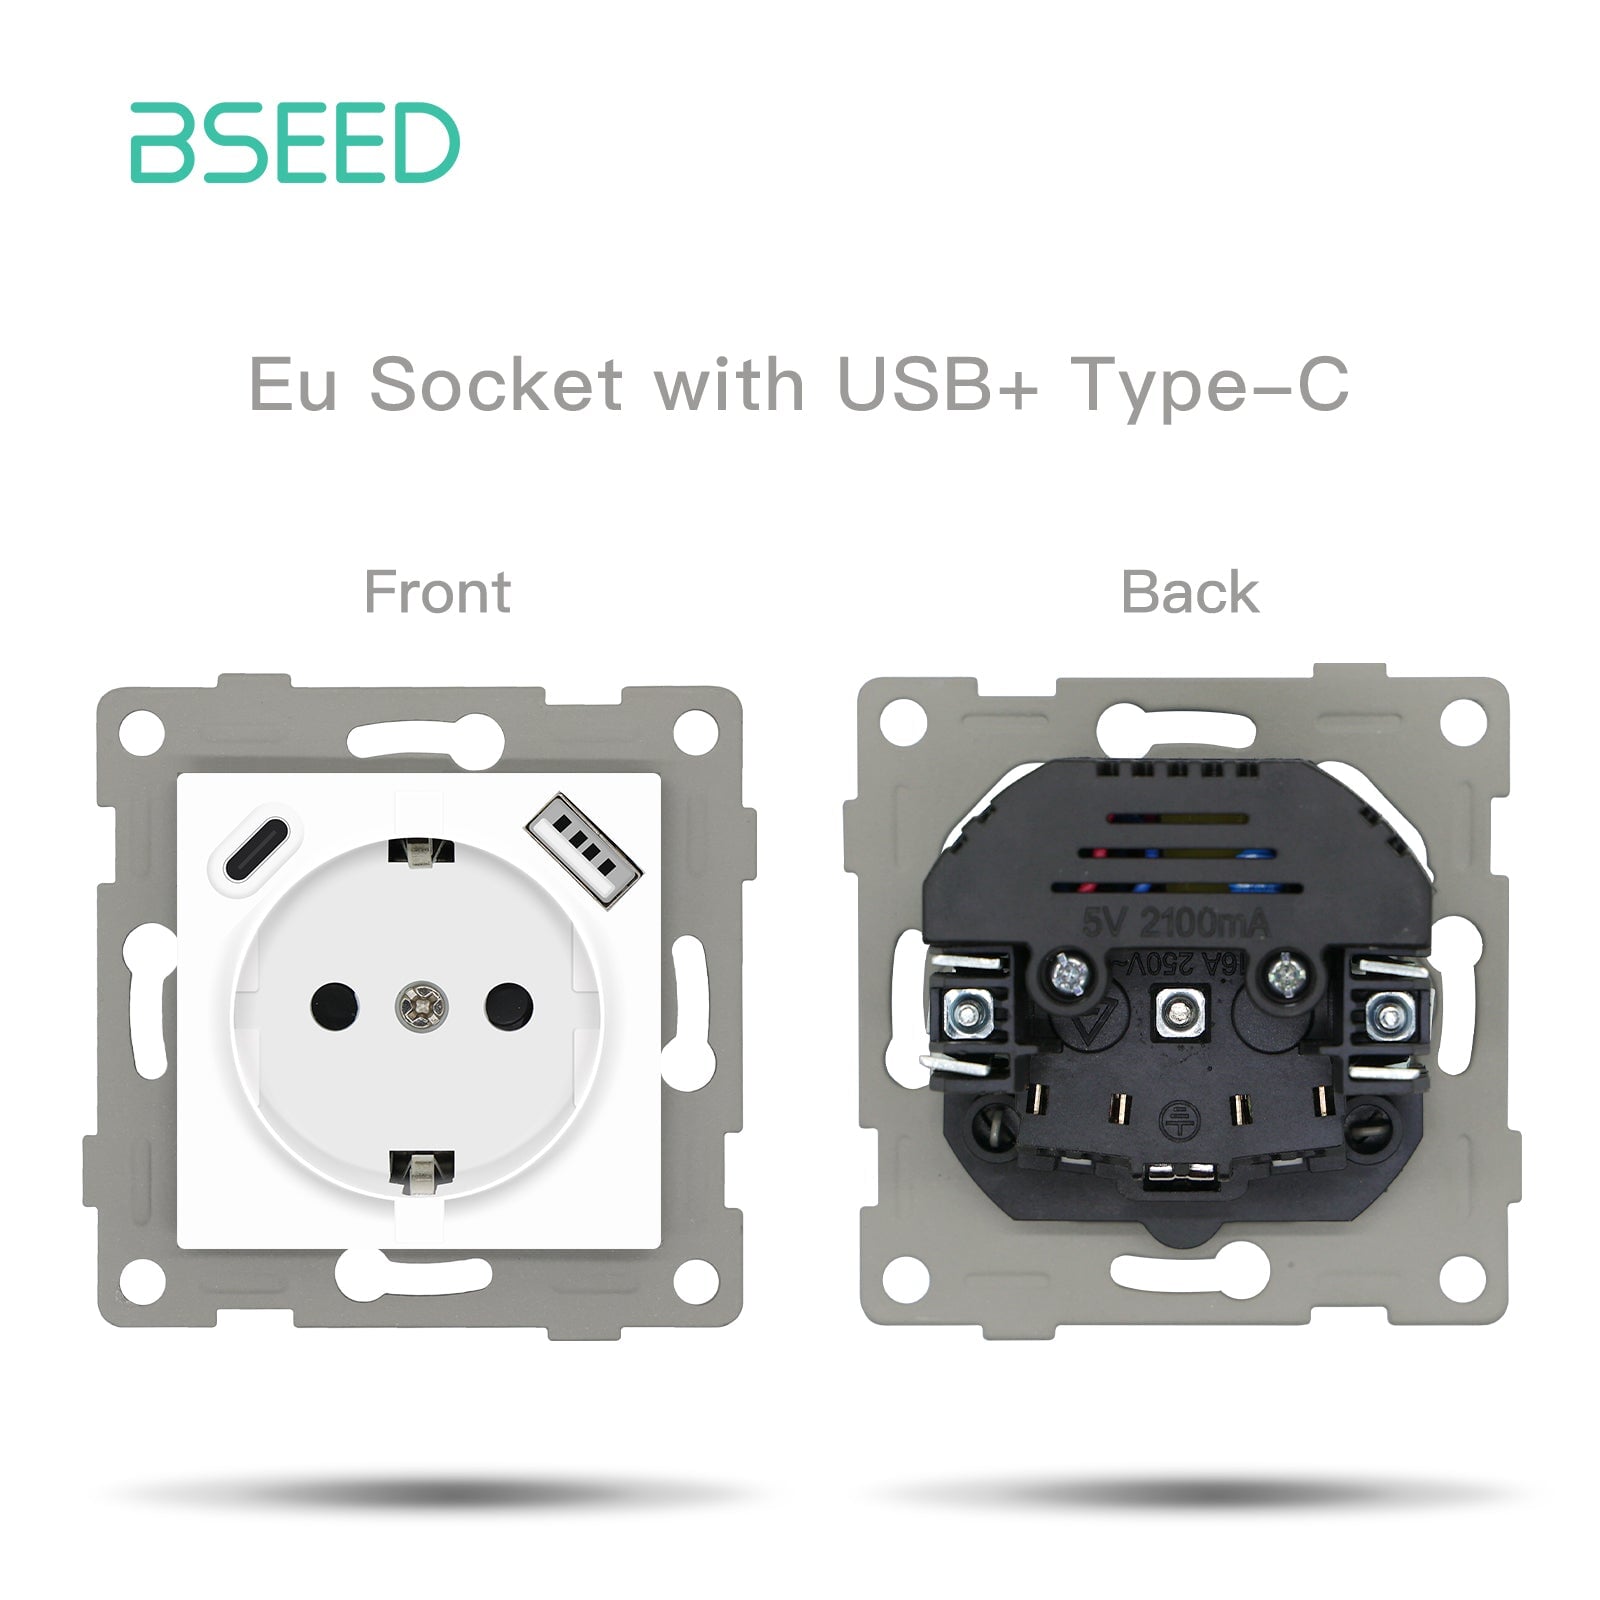 BSEED EU standard Function Key Cover Socket with Claw technology DIY Parts Power Outlets & Sockets Bseedswitch WHITE eu socket with usb-c 